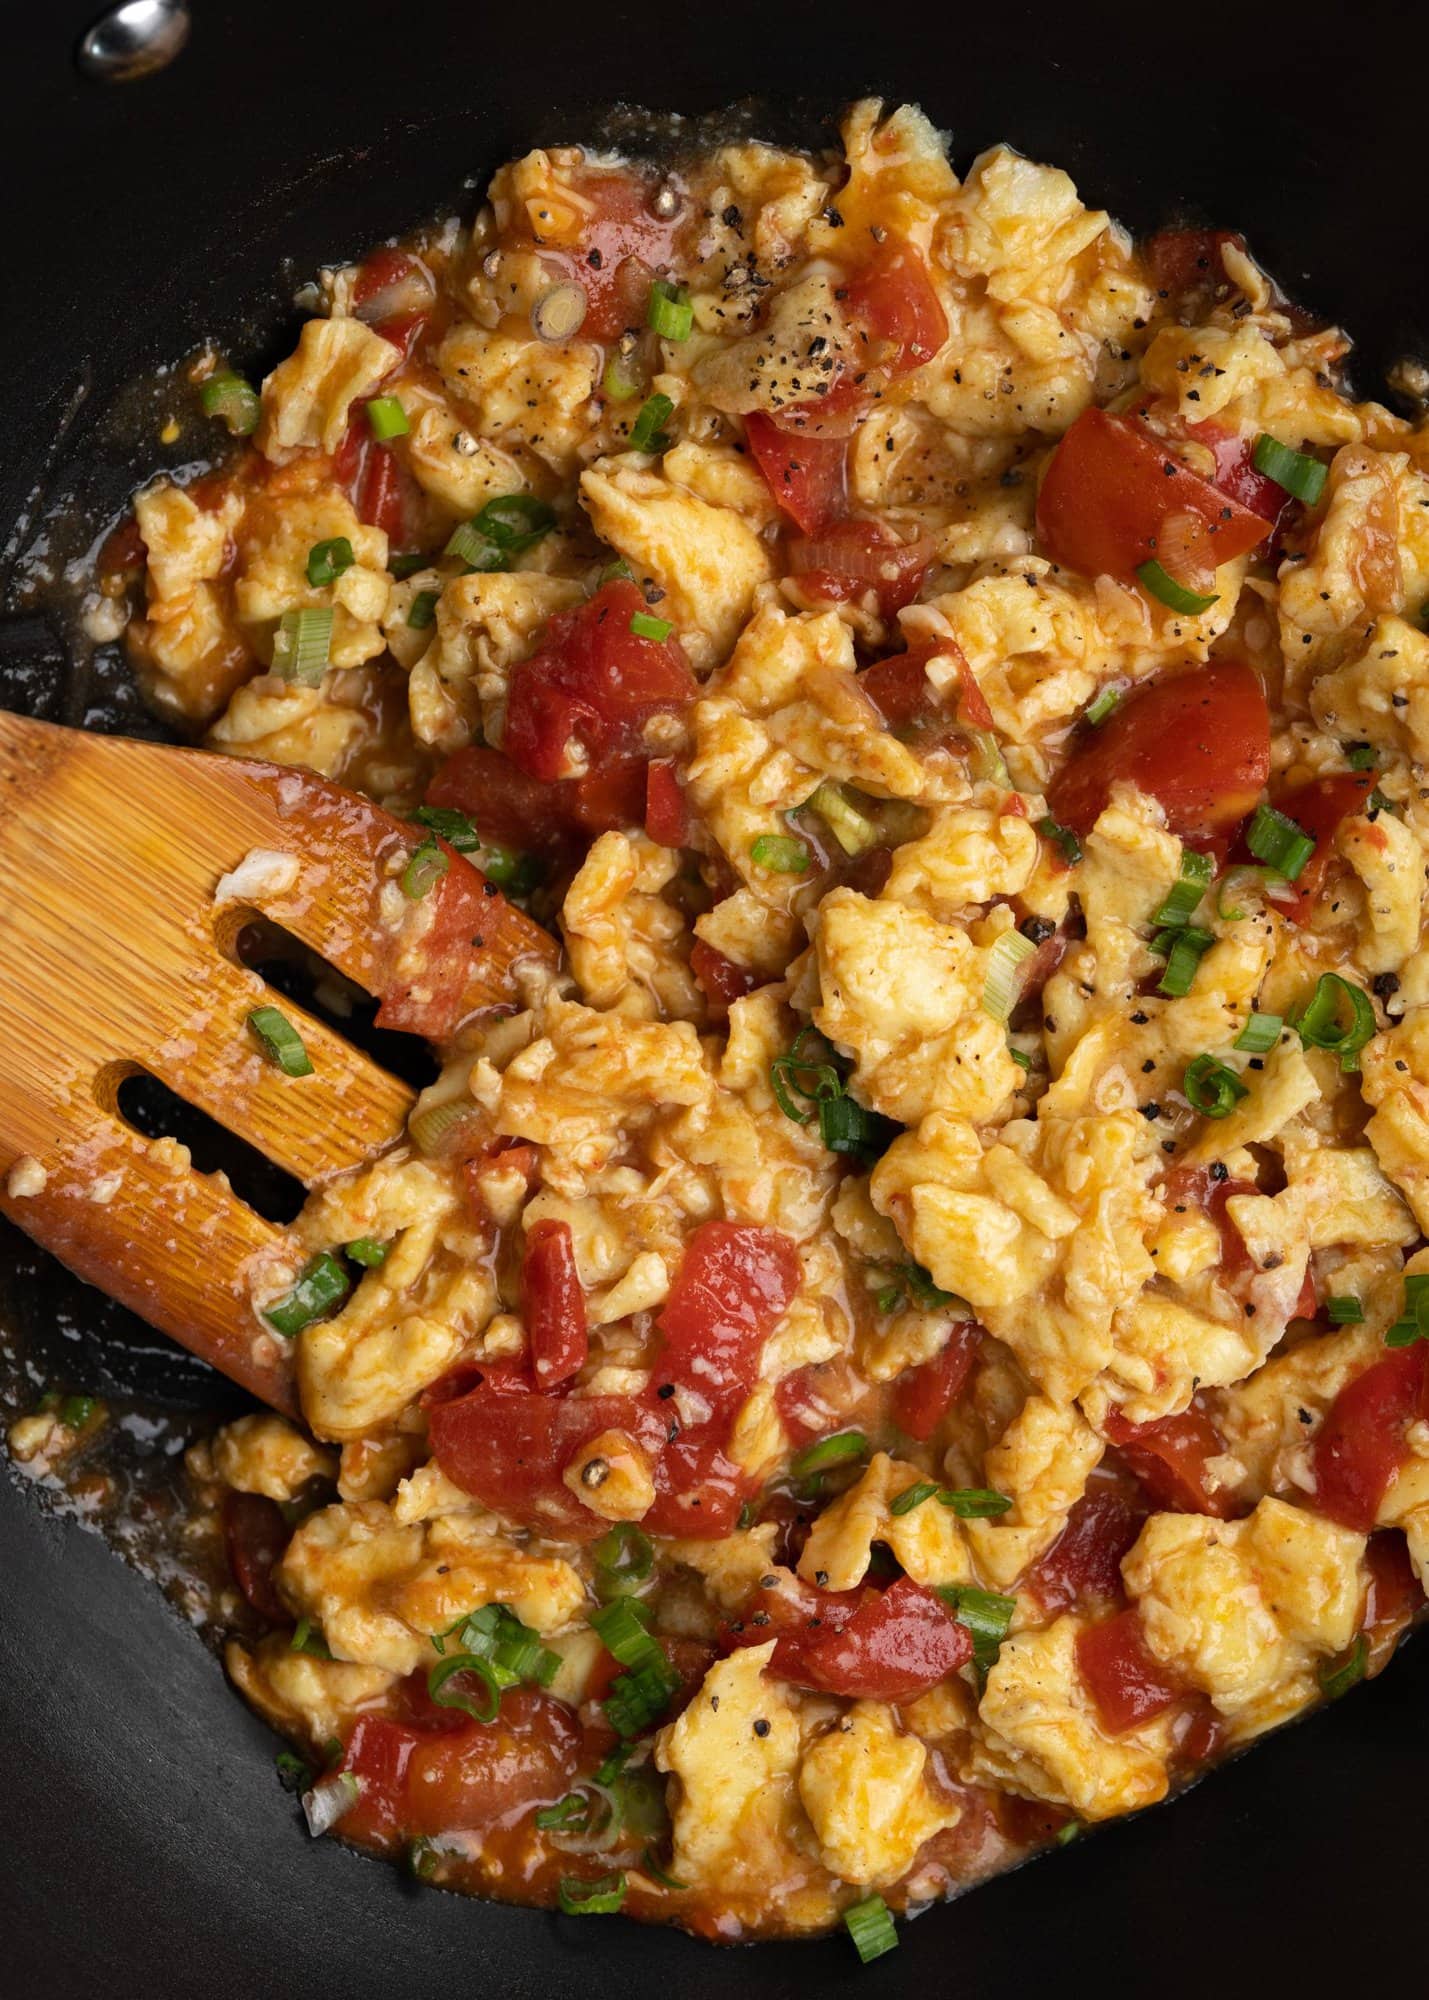 Tomato Egg stir fry is a classic Chinese dish. Soft scrambled egg is tossed with ripe tomato wedges, then seasoned with soy sauce & sesame oil for a flavor-packed dish. 